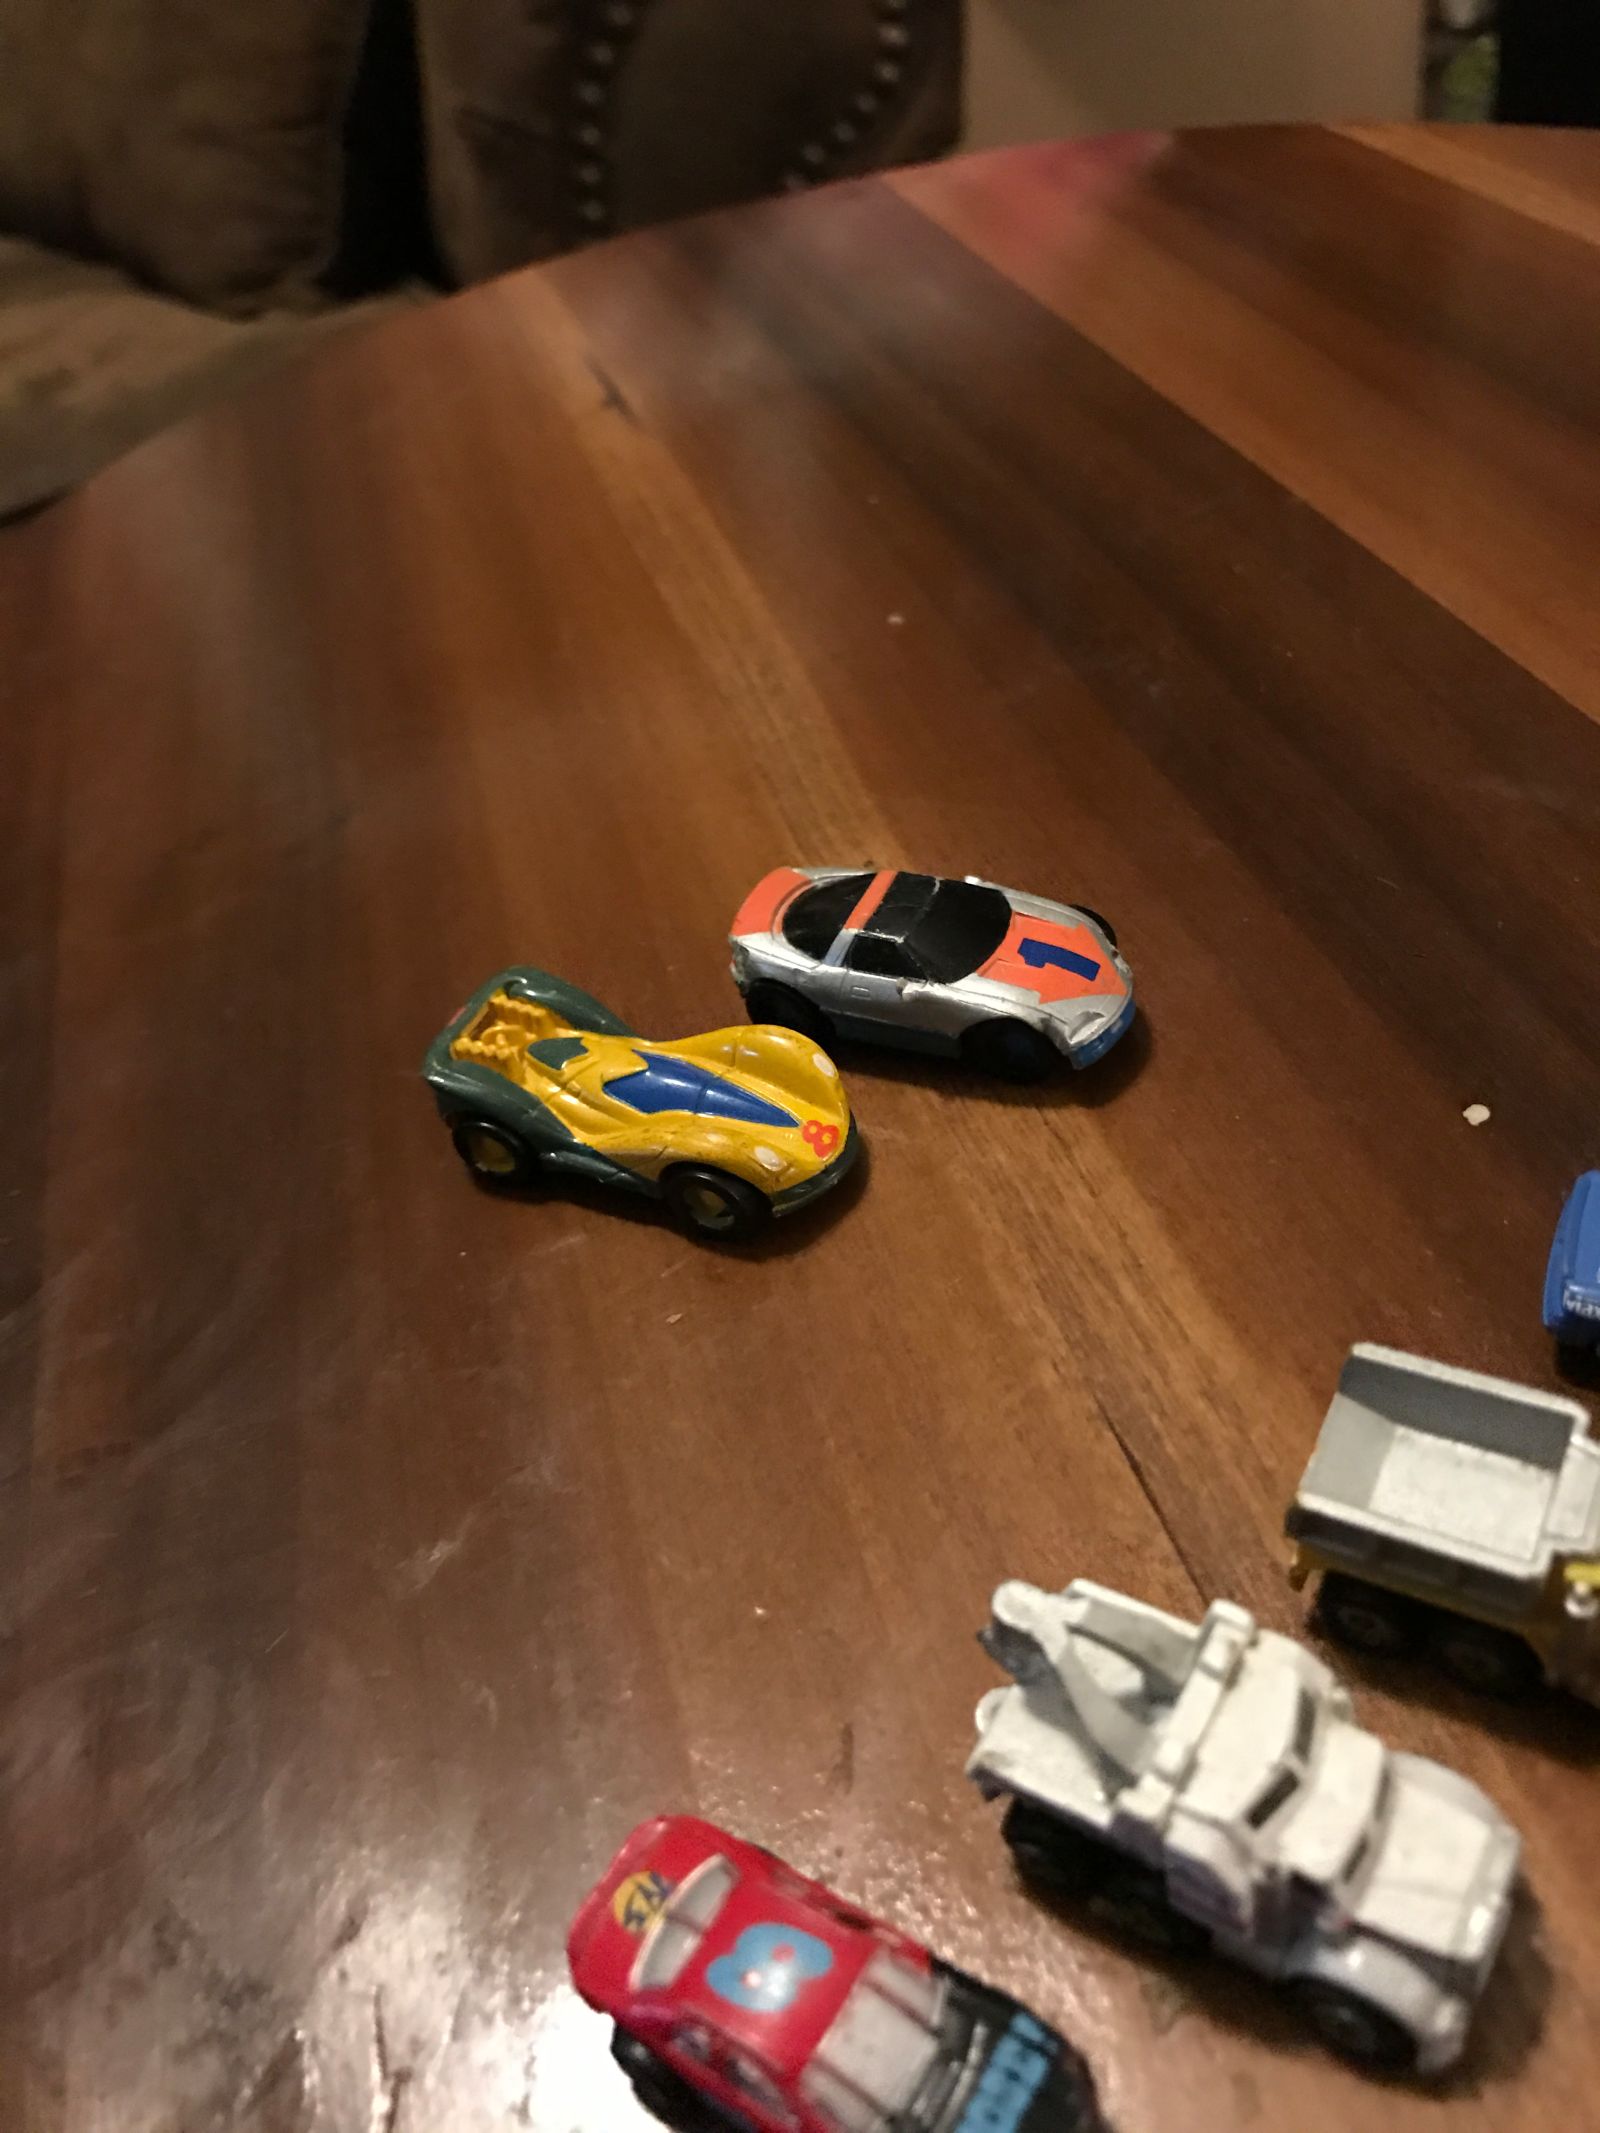 These are branded as Micro Machines Radicators 